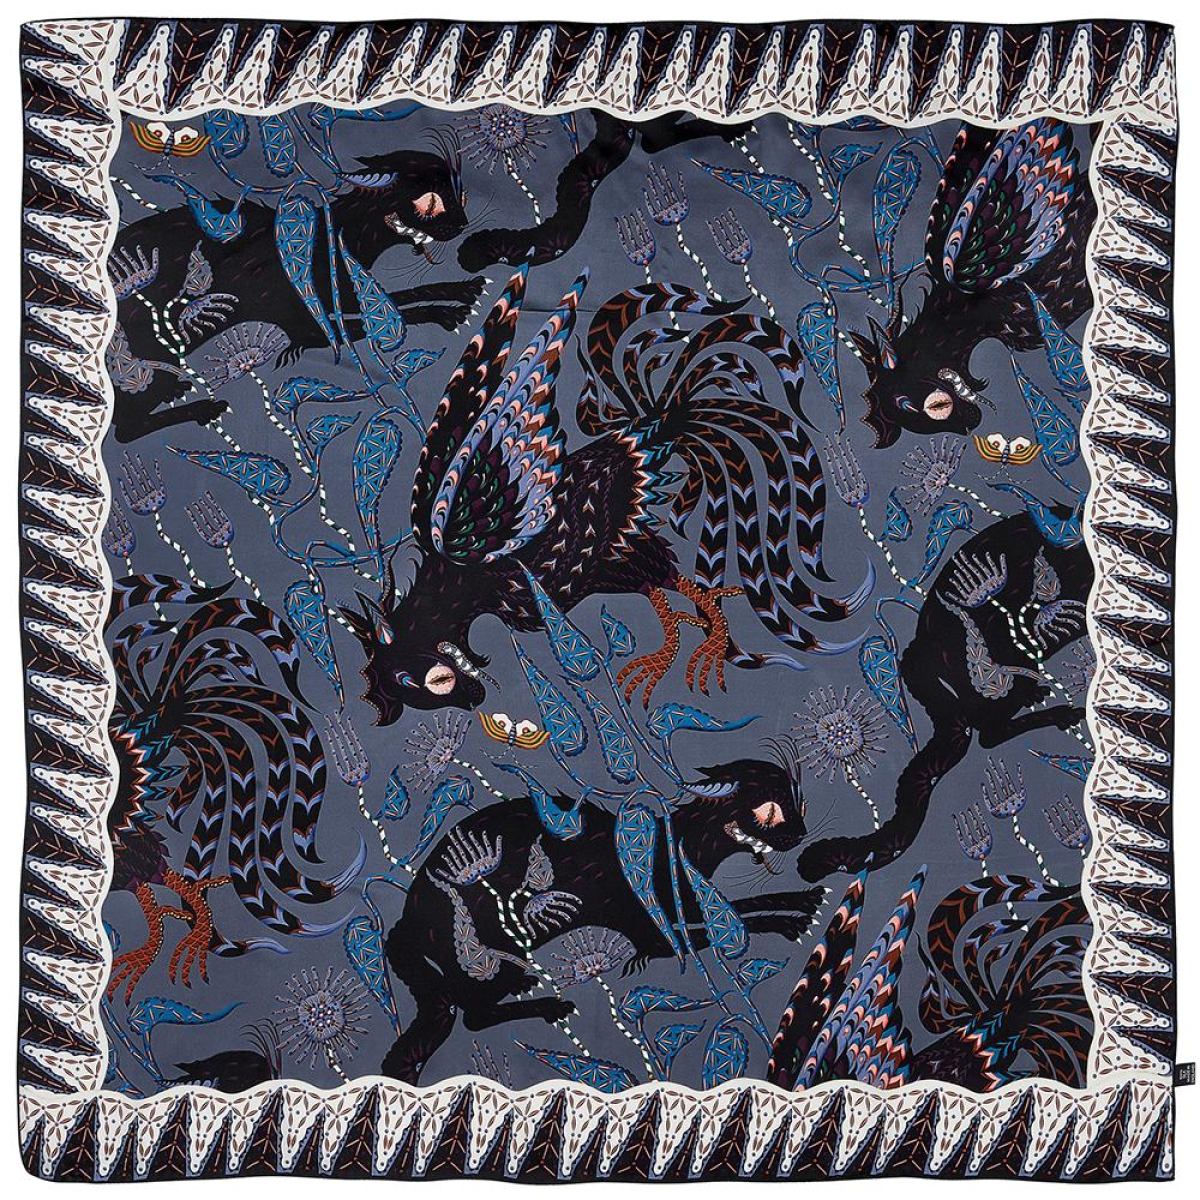 Scarf with Art Print "Ferocious Cats" on Pure Silk Satin